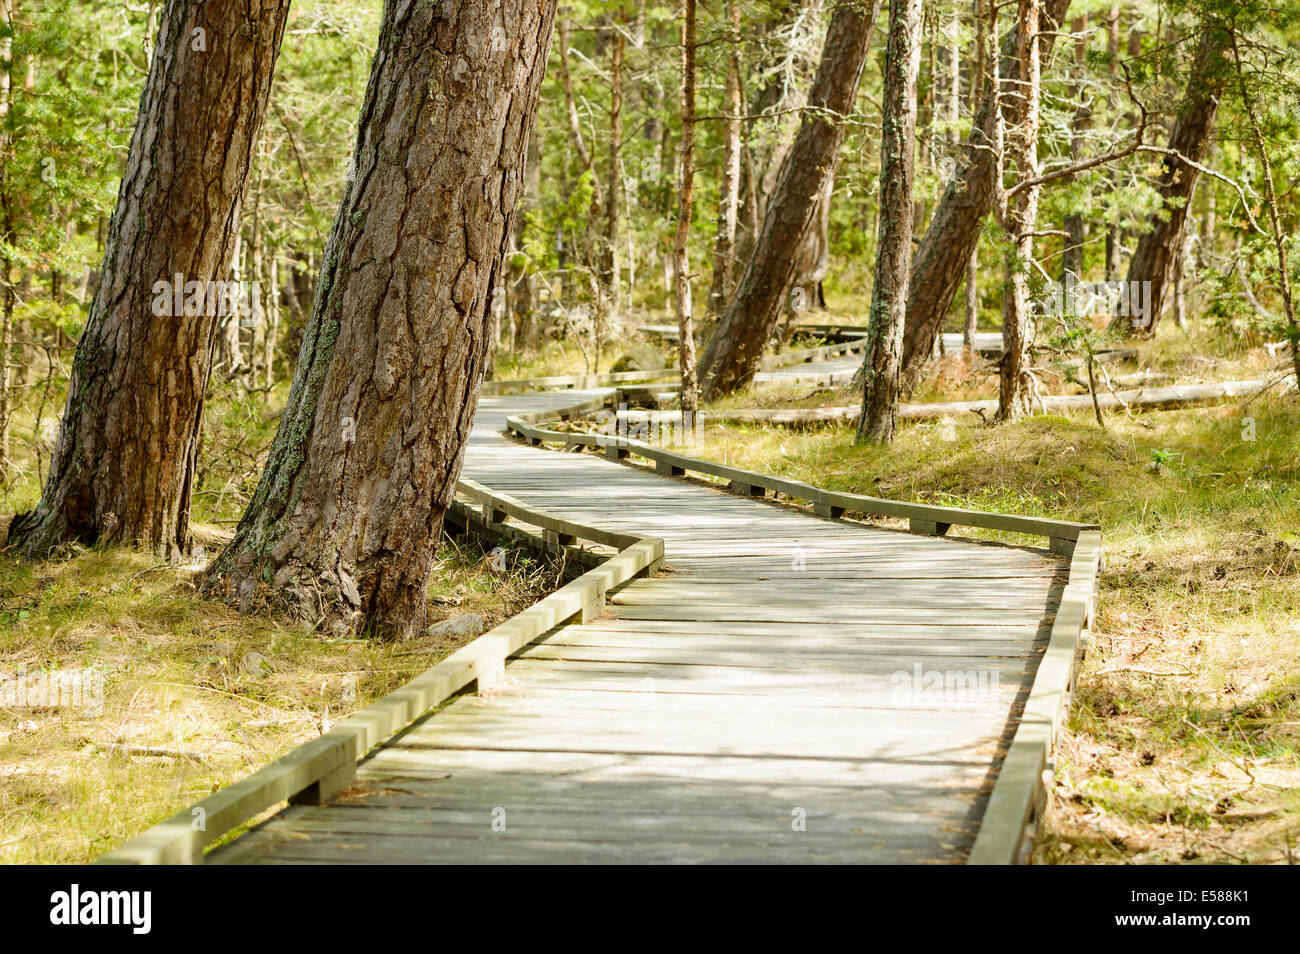 Wooden path for wheelchairs in nature reserve. Stock Photo